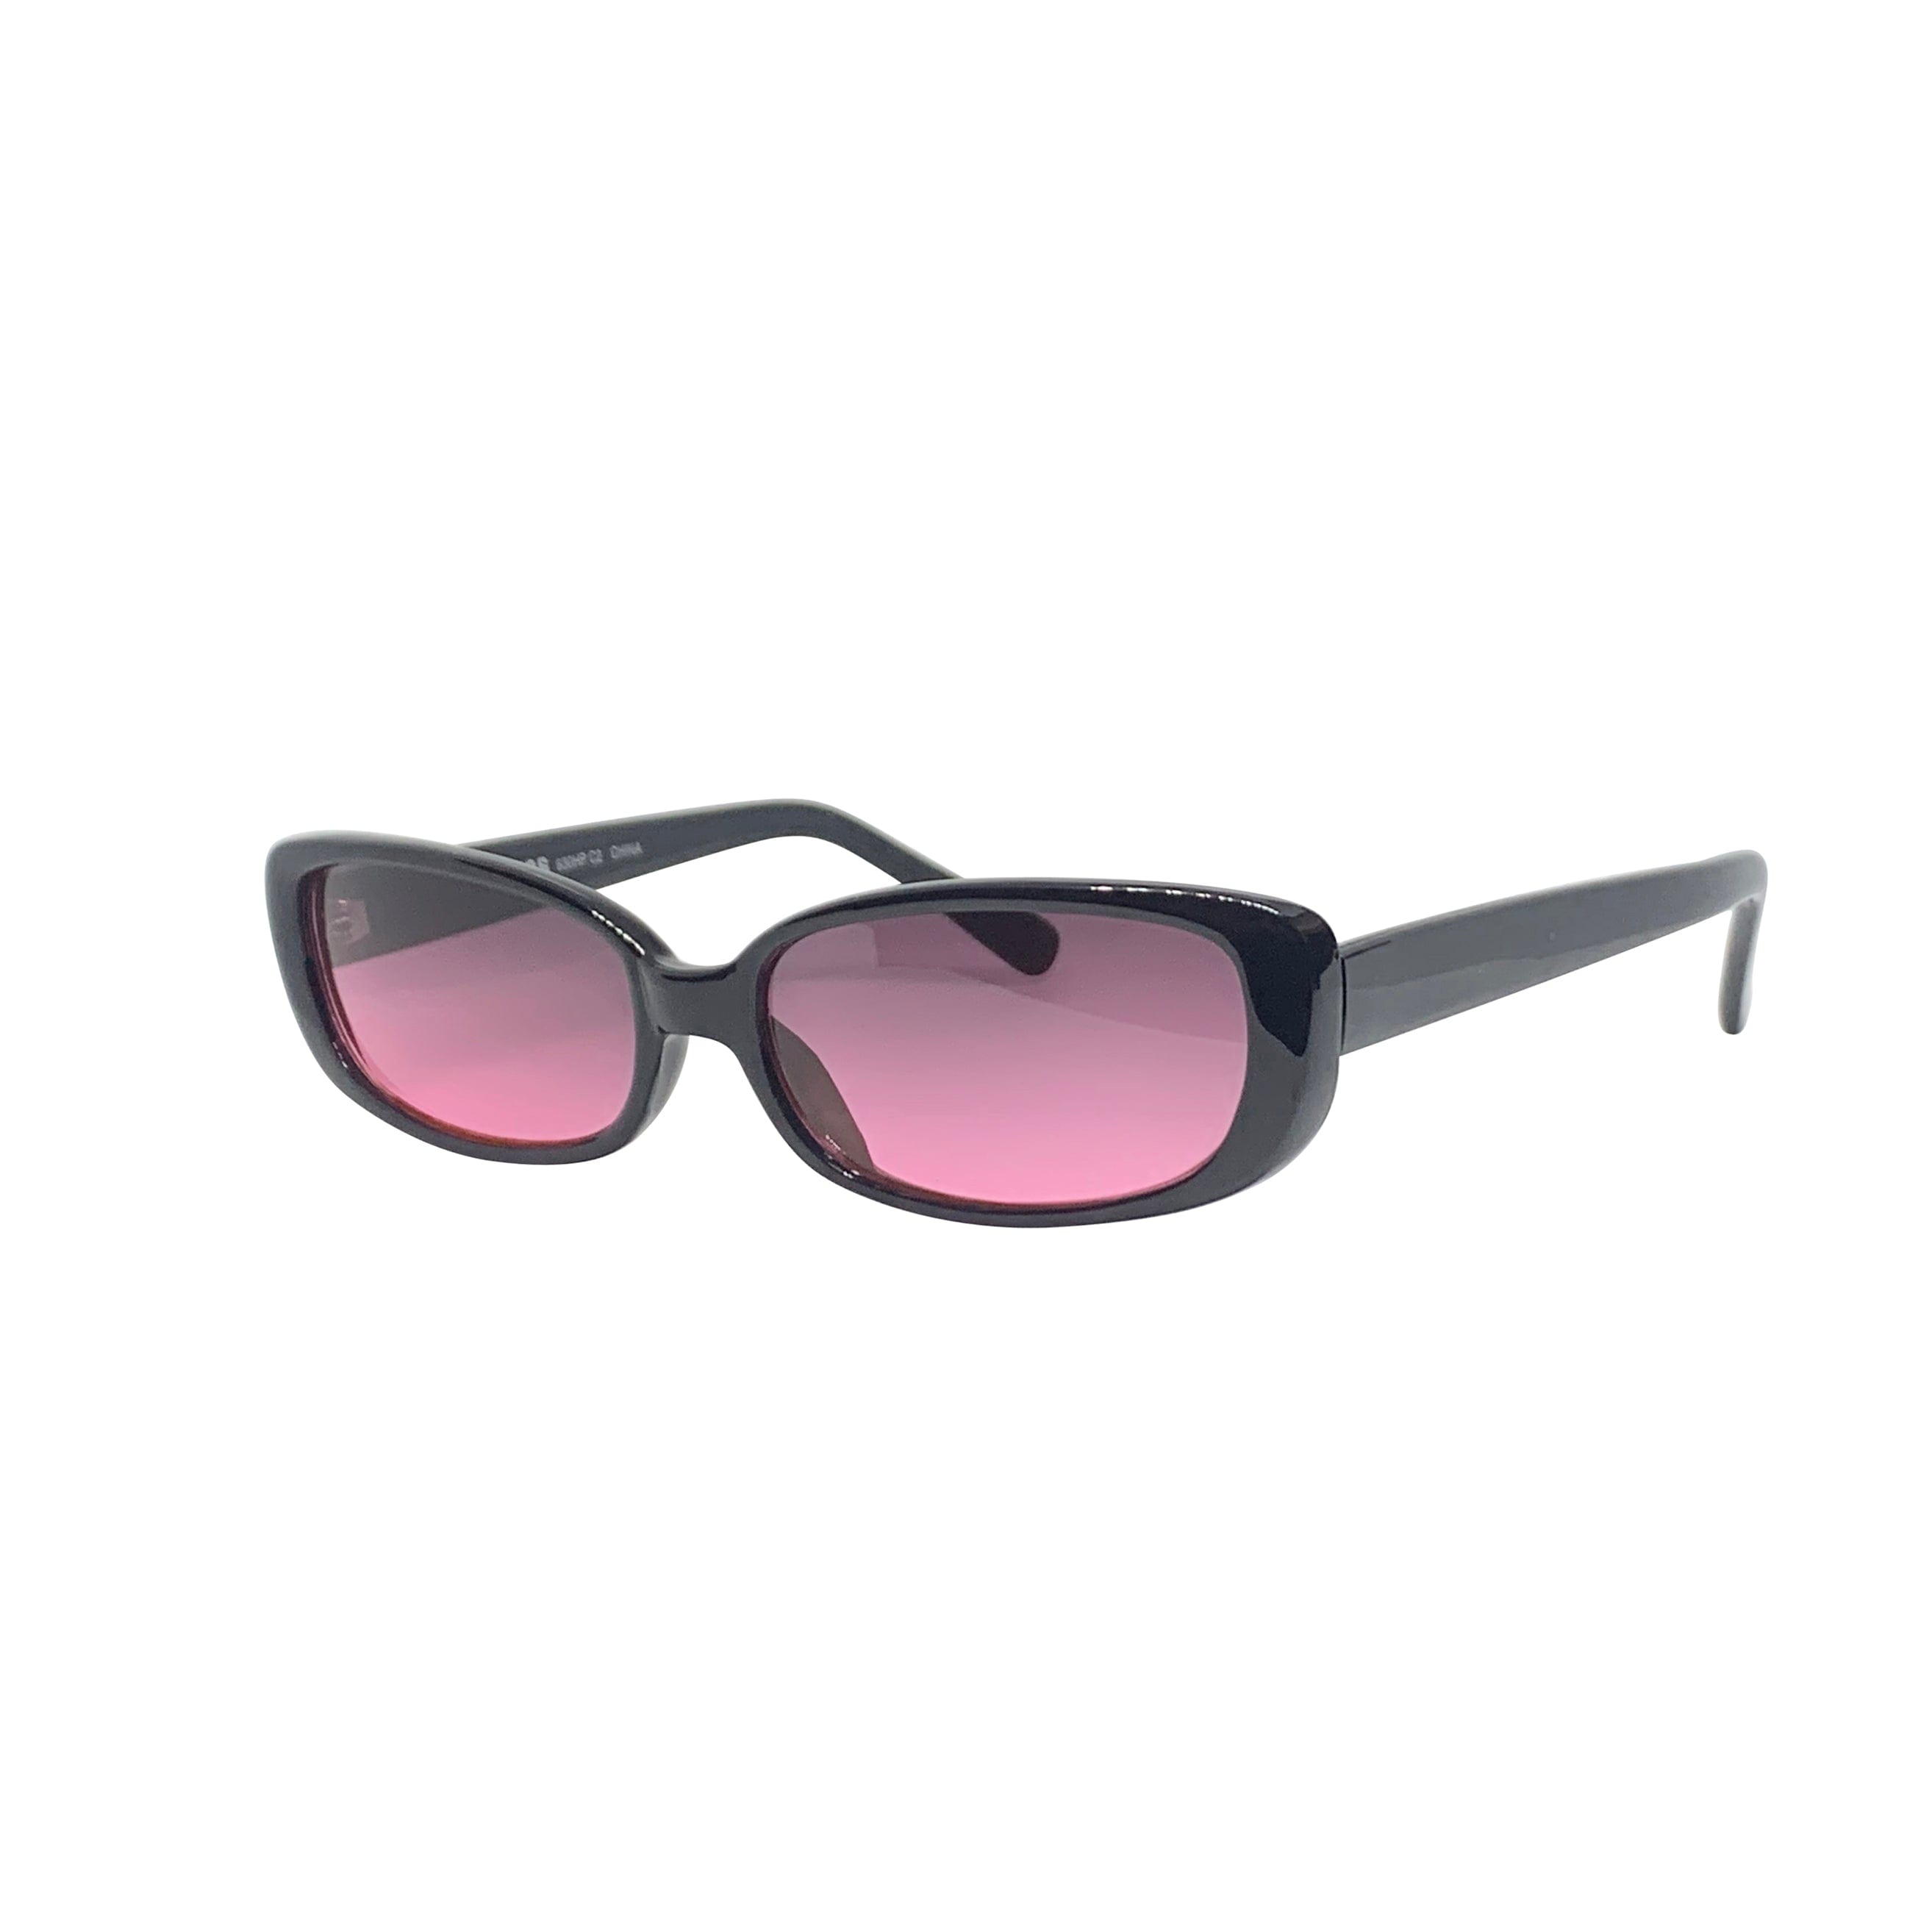 BUGGIN’ Black and Pink 90s Square Sunnies